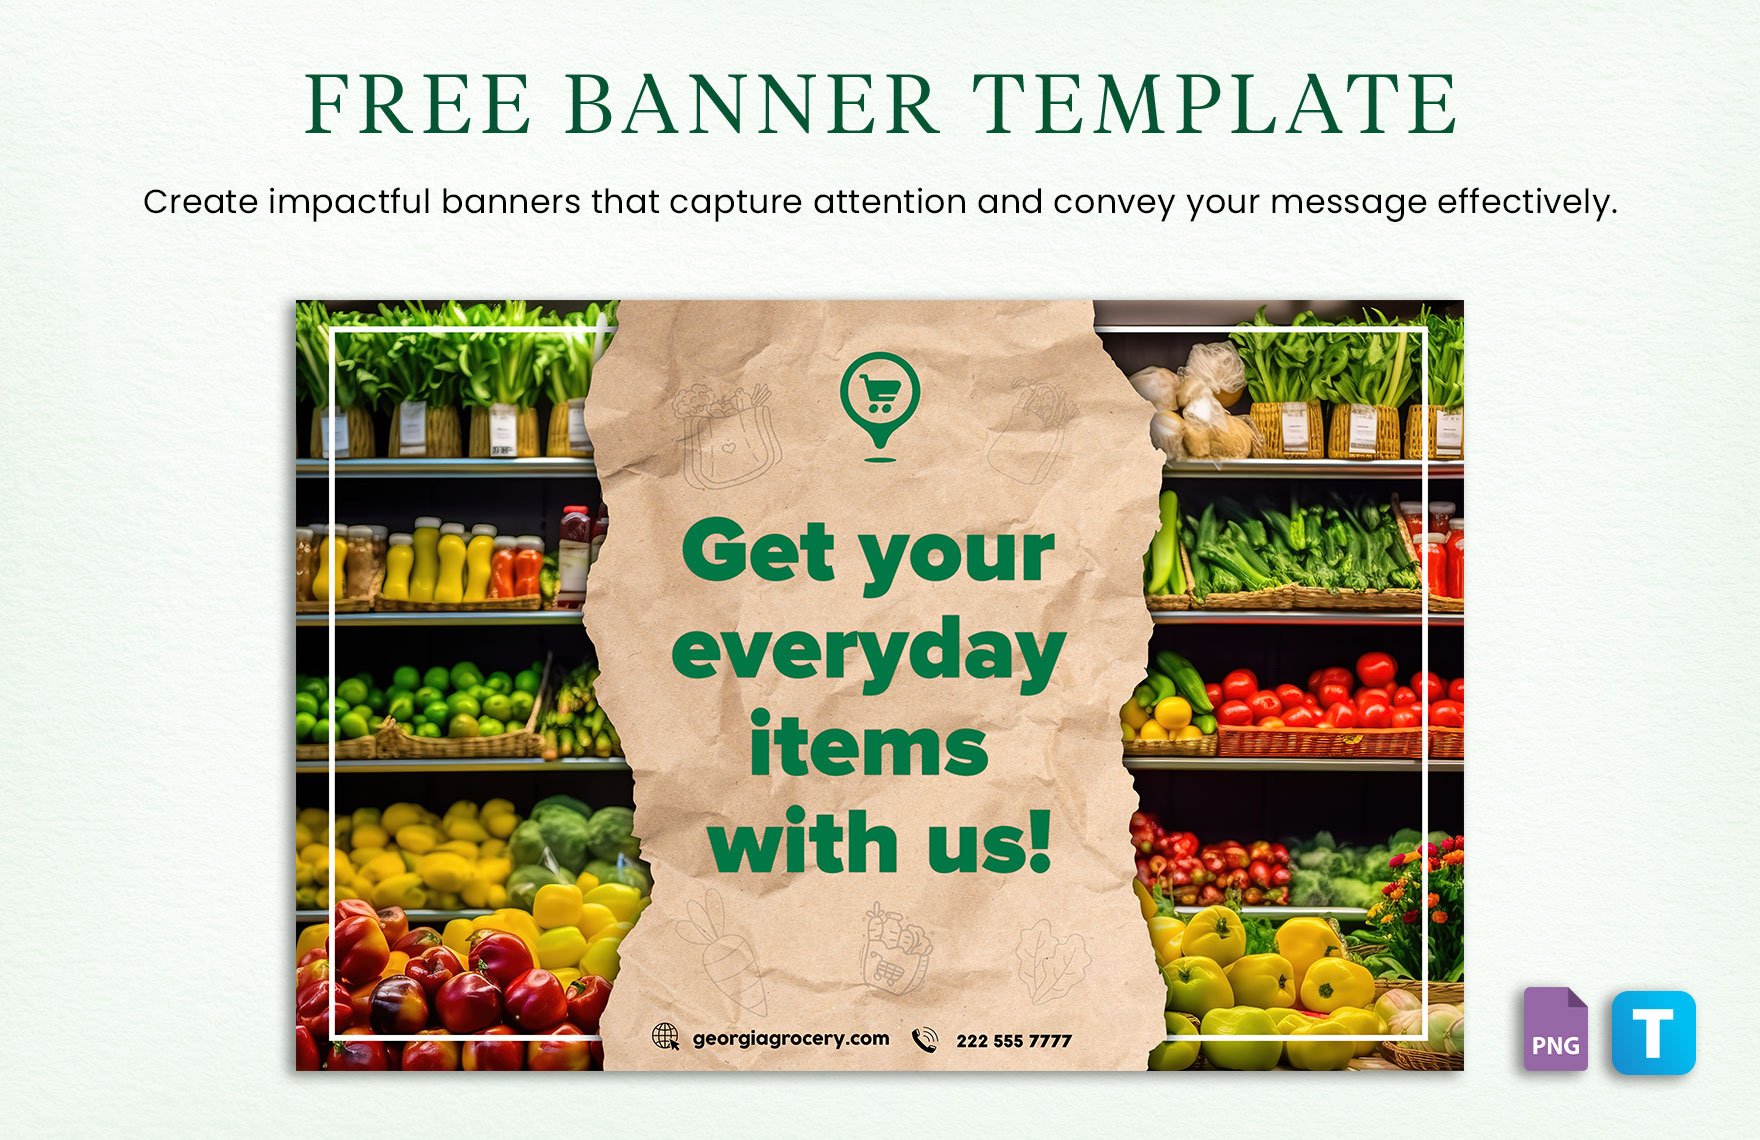 Banner Template in PNG